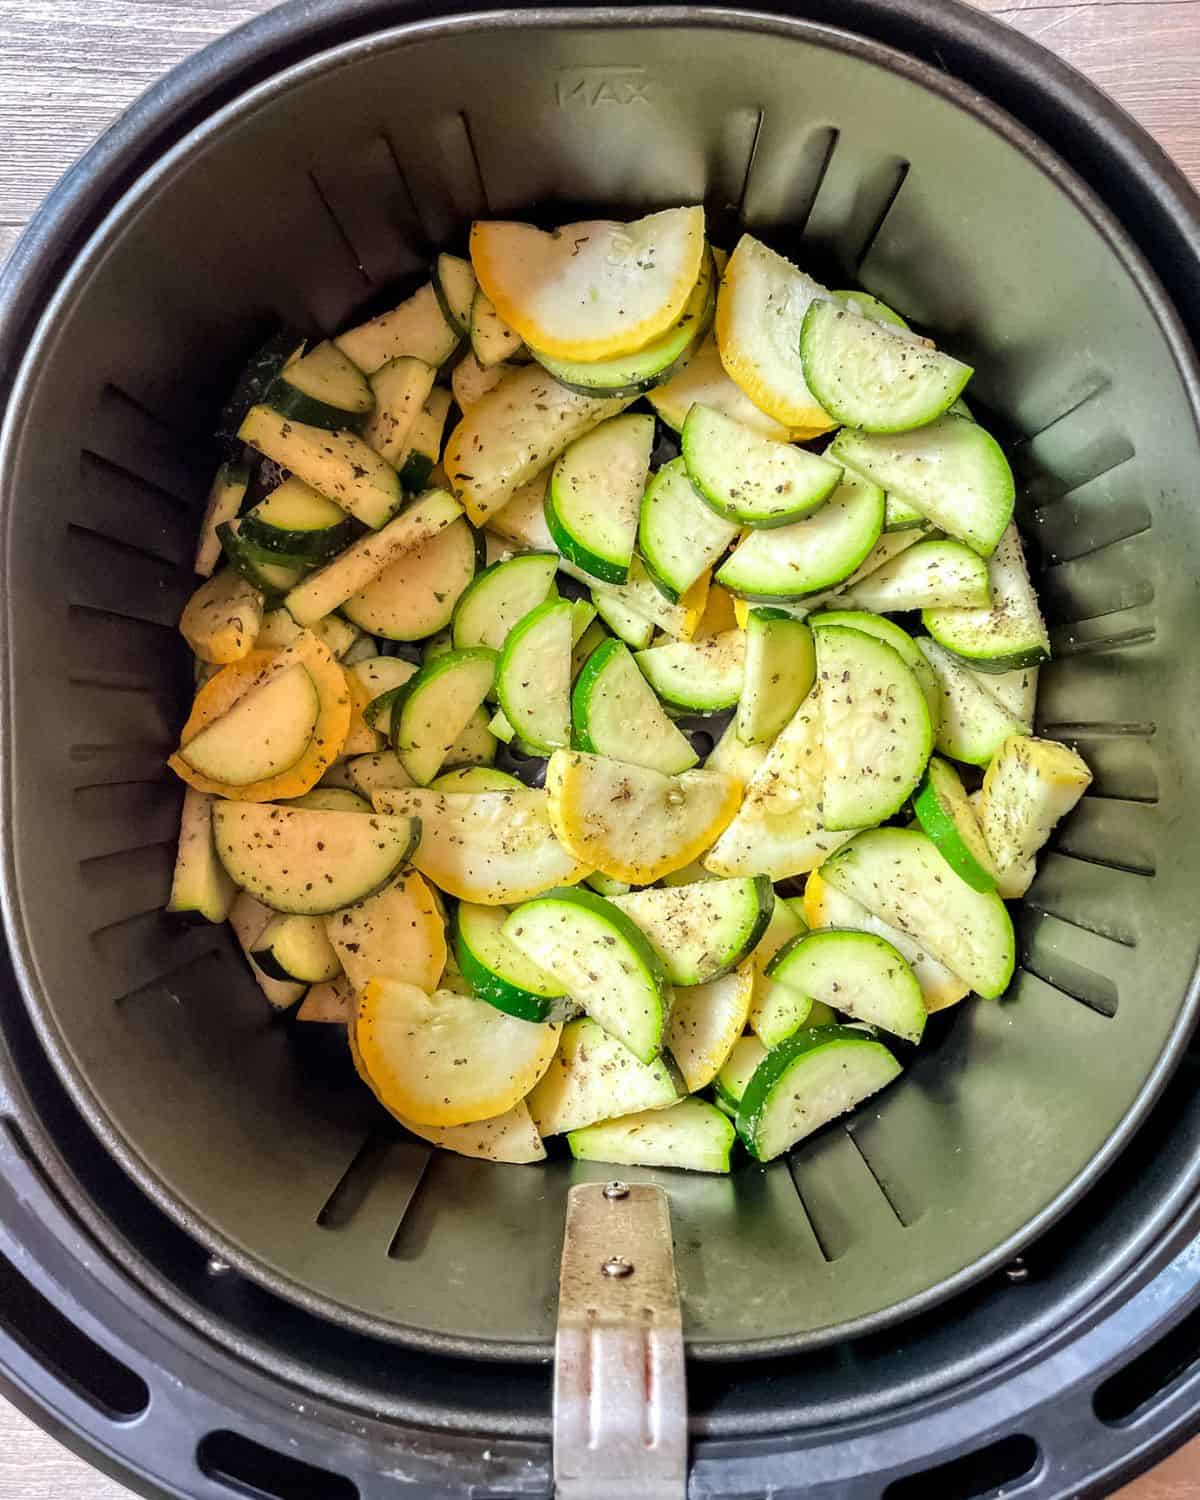 Uncooked zucchini and squash in the bottom of an air fryer basket.